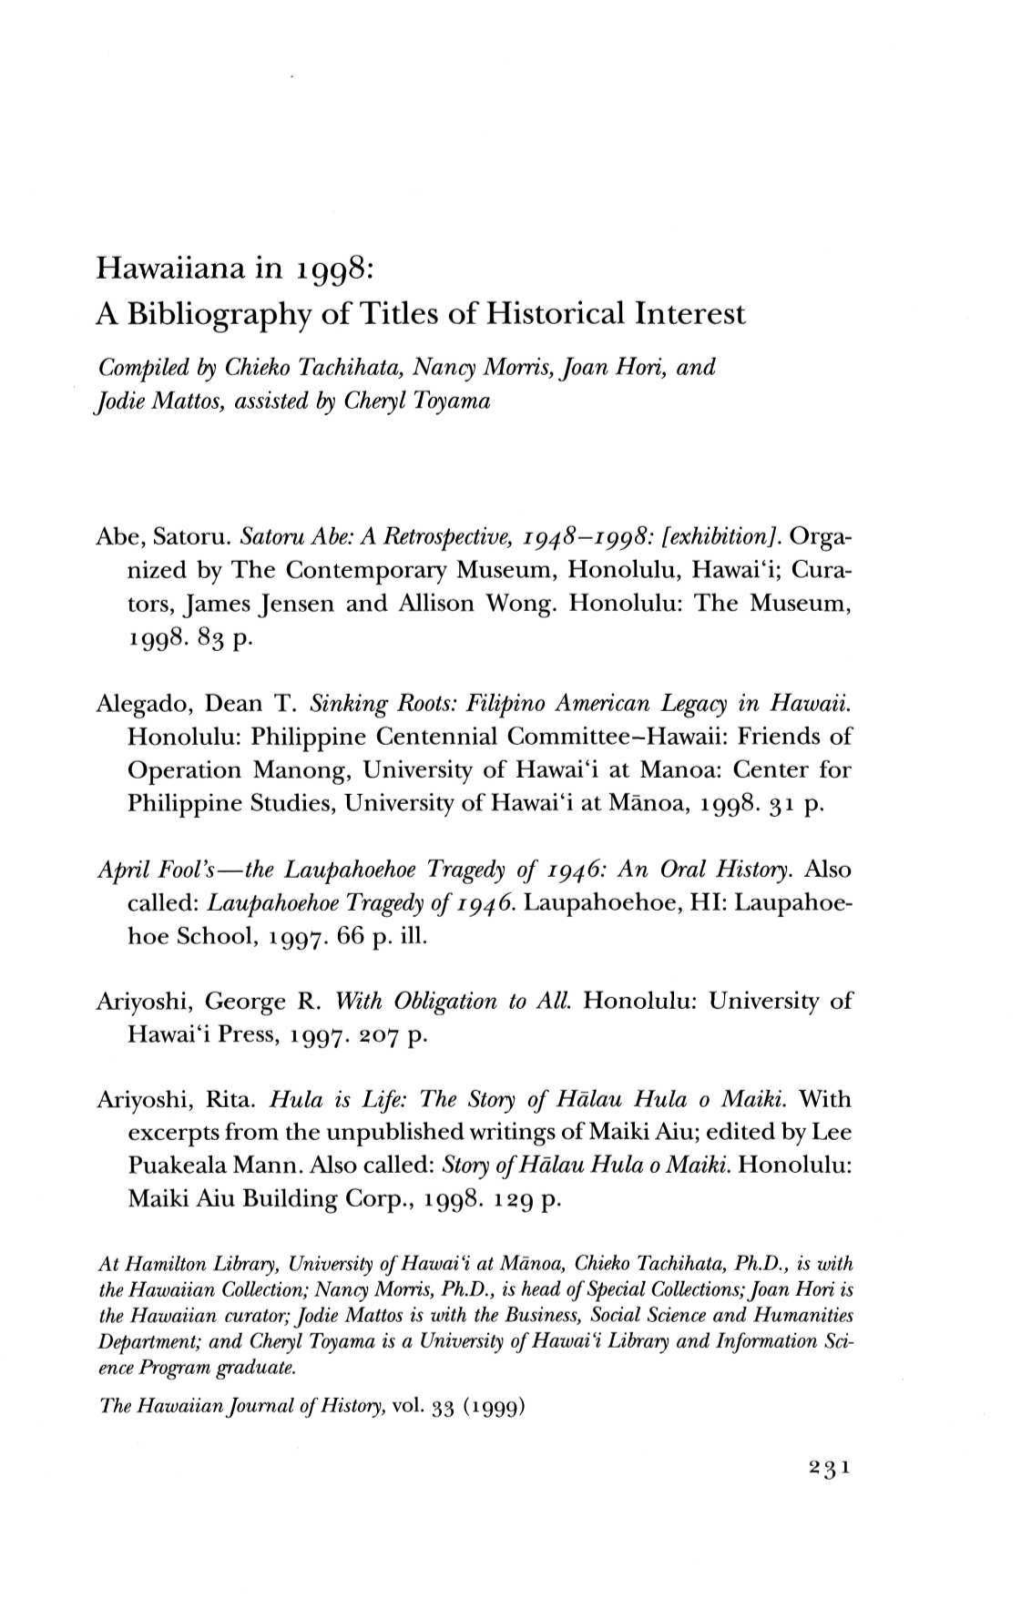 Hawaiiana in 1998: a Bibliography of Titles of Historical Interest